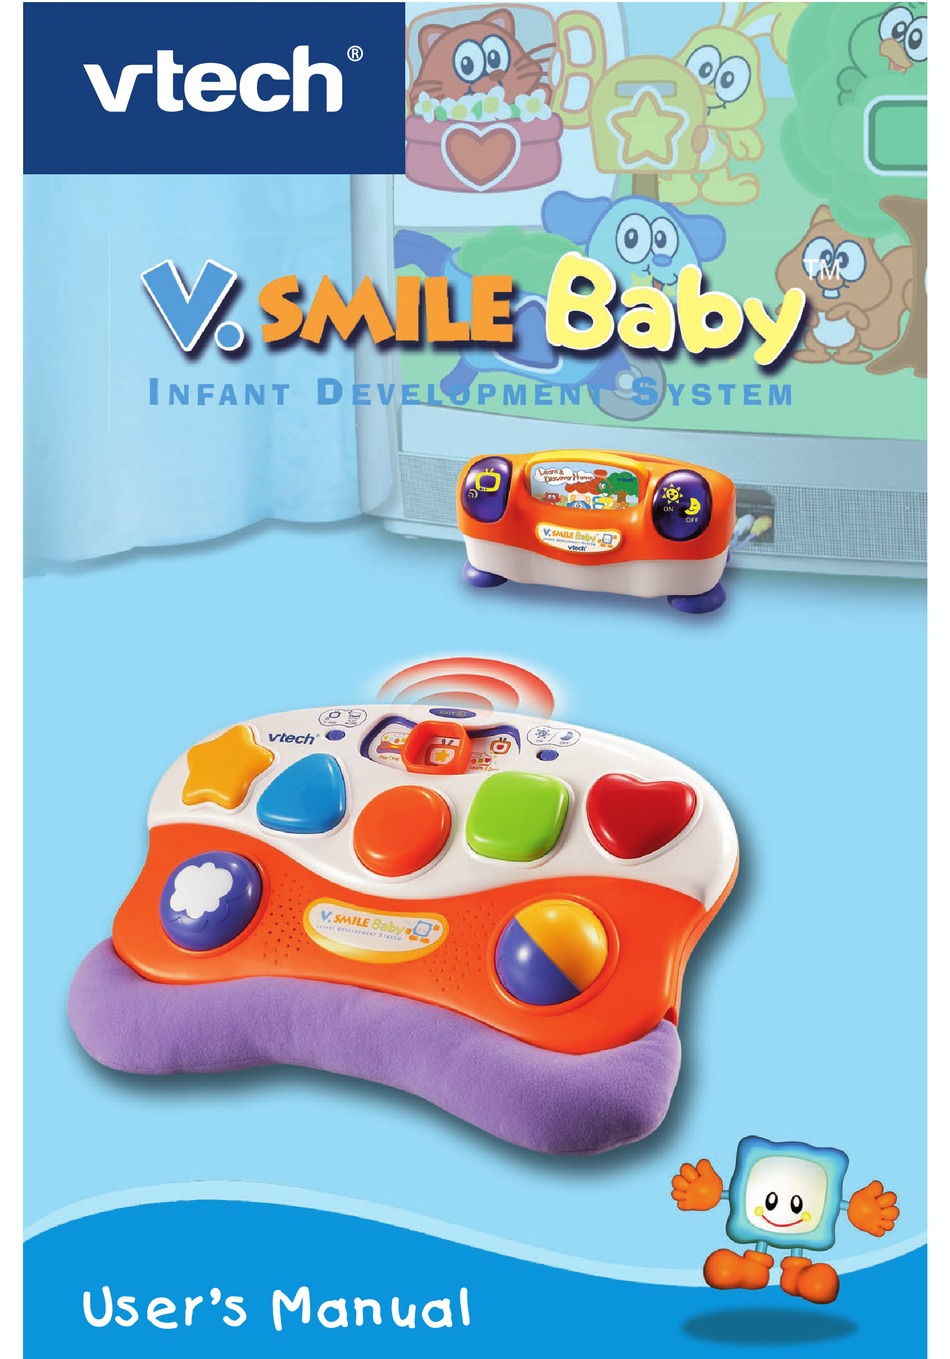 vtech w smile troubleshooting